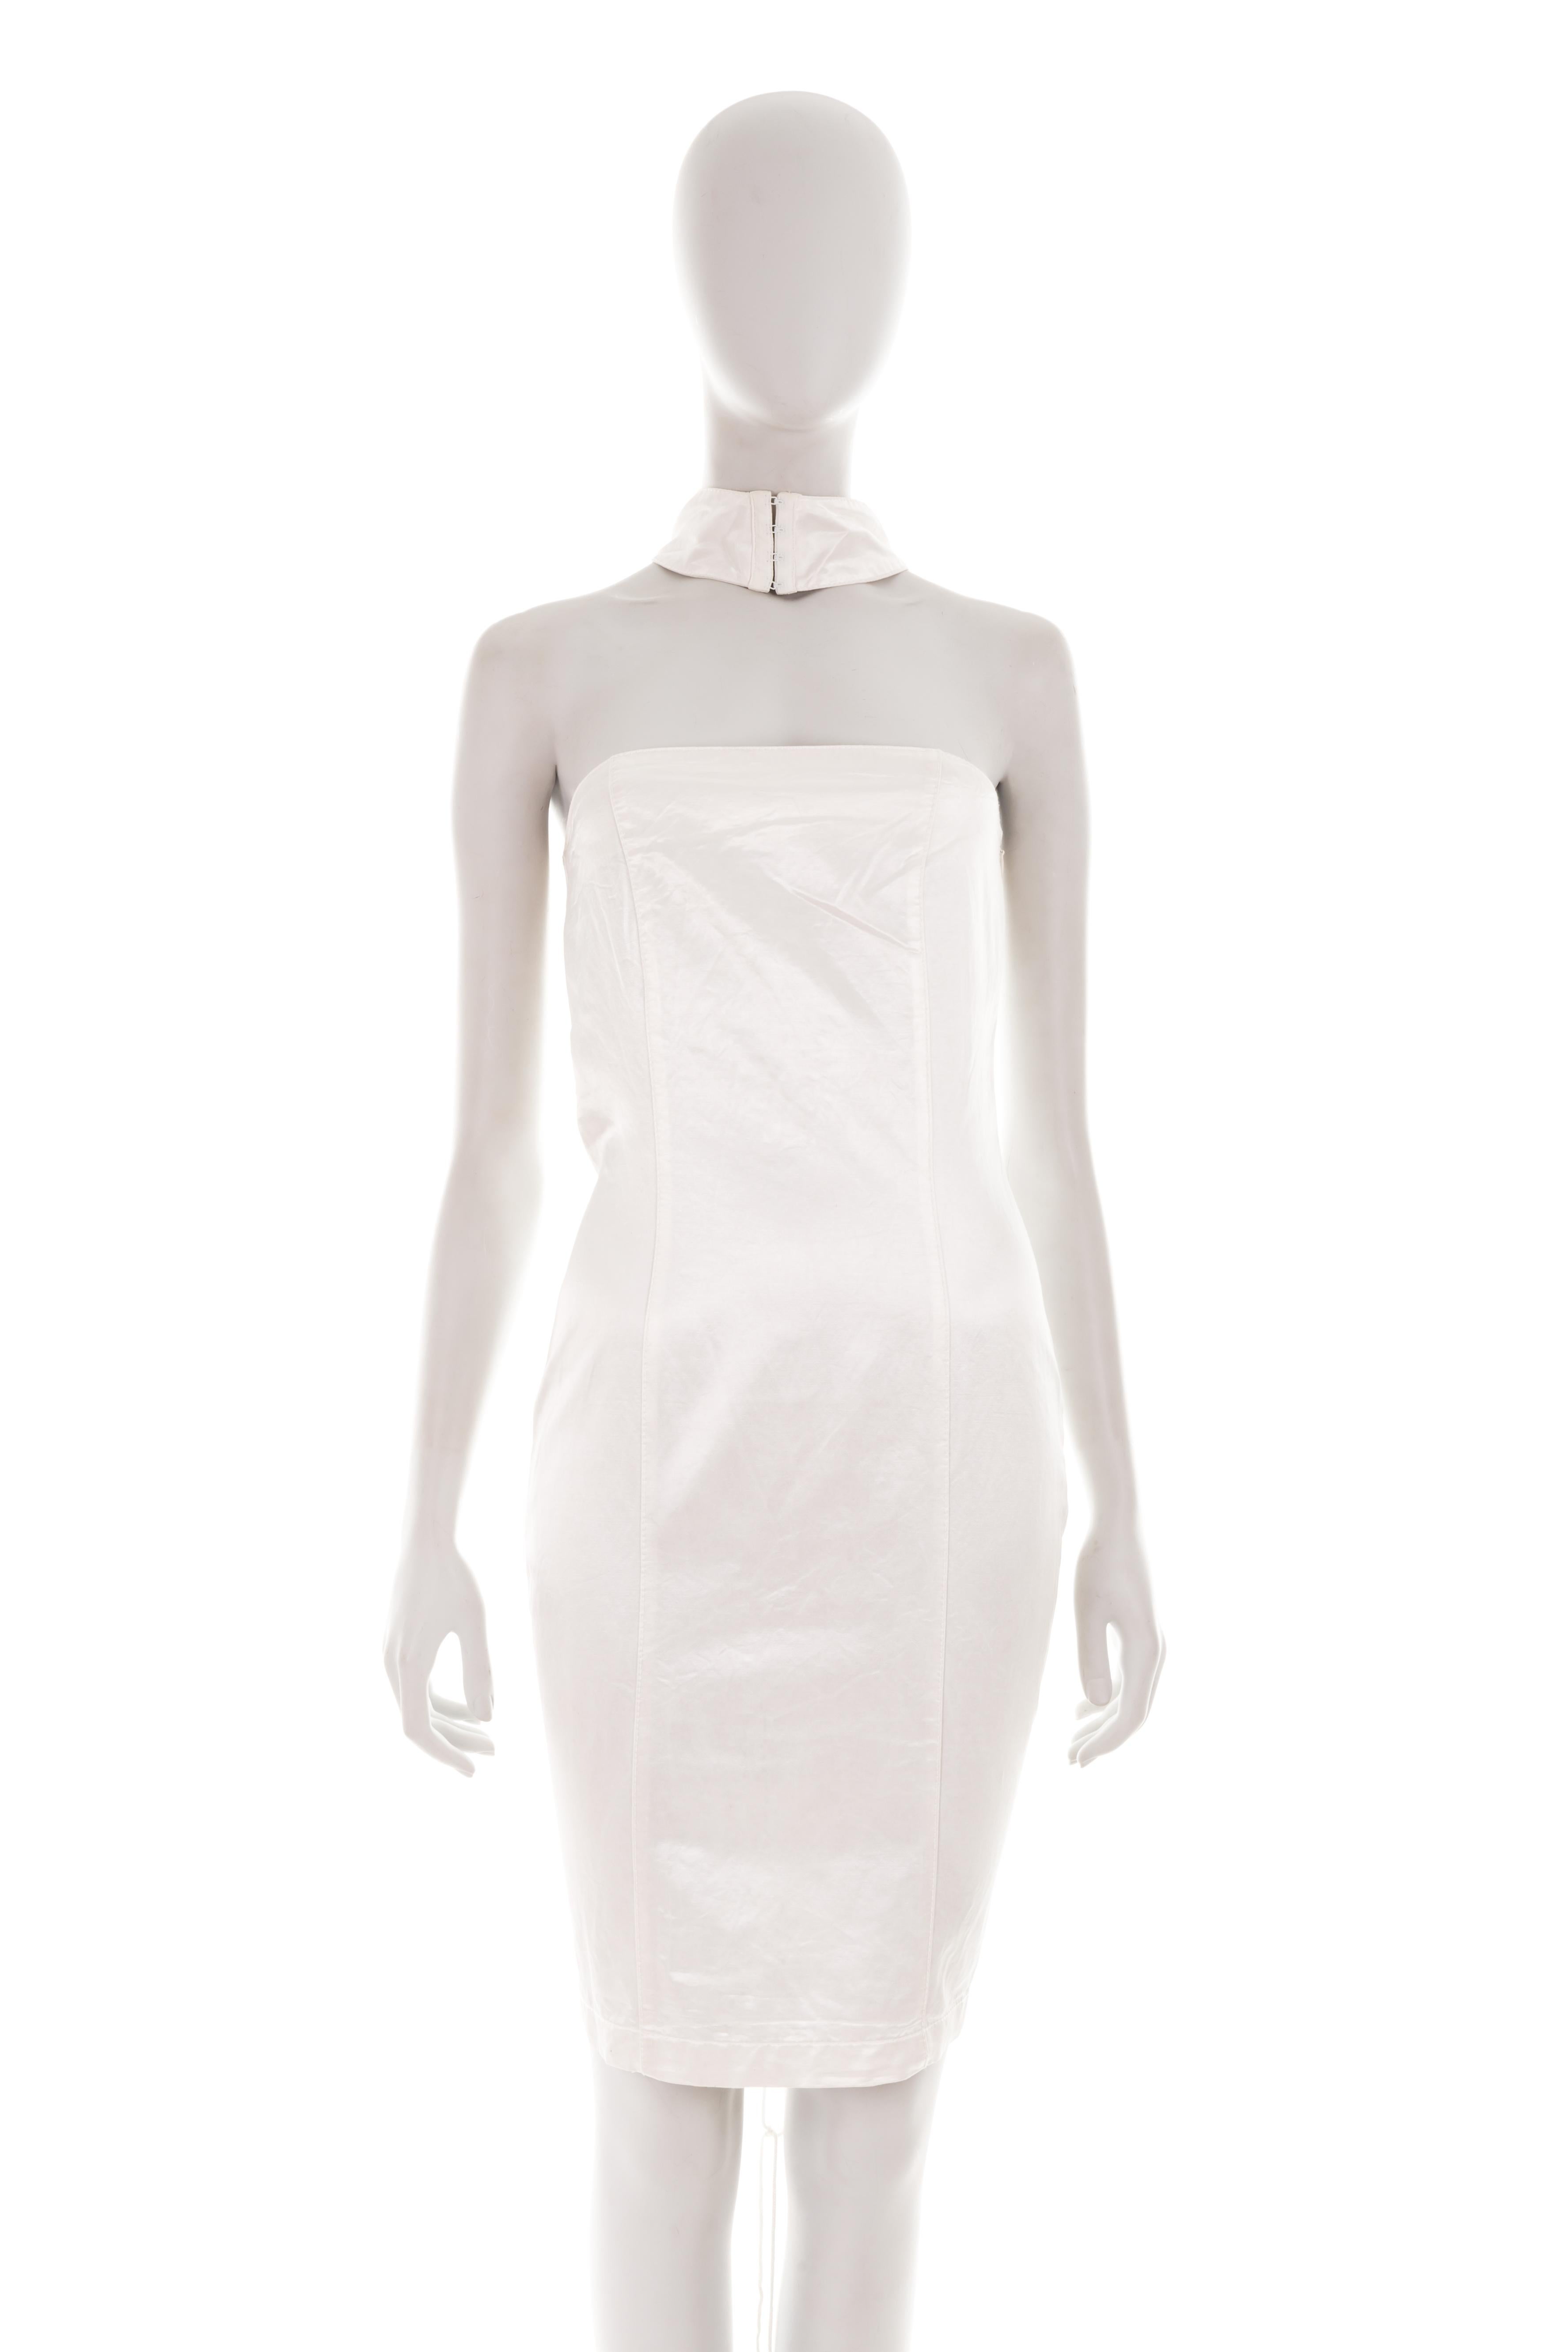 - D&G by Dolce & Gabbana
- Spring-summer 2004 collection 
- Sold by Gold Palms Vintage
- Structured white silk midi dress 
- Lace-up back
- Hook fastening halterneck
- Size: IT 44